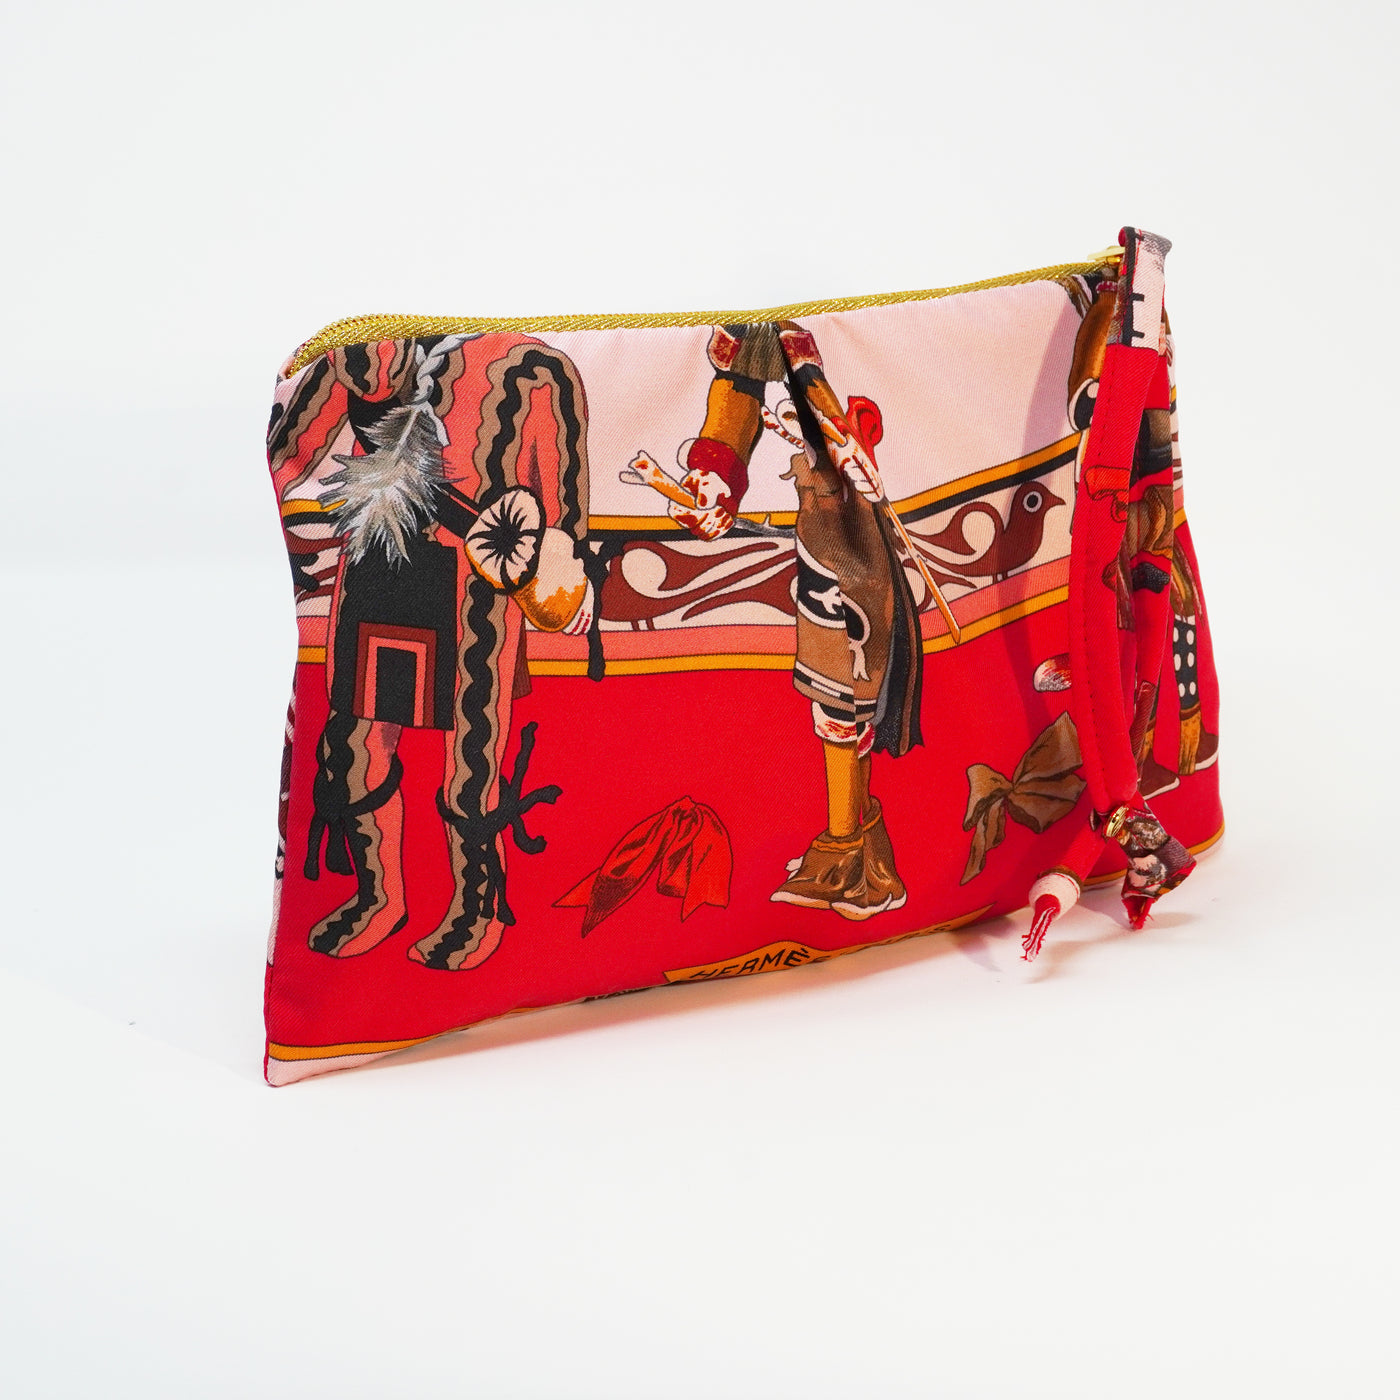 "Kachinas" Scarf Bag (Upcycled from Hermes Scarf) Party Clutch Hampton Road Designs   